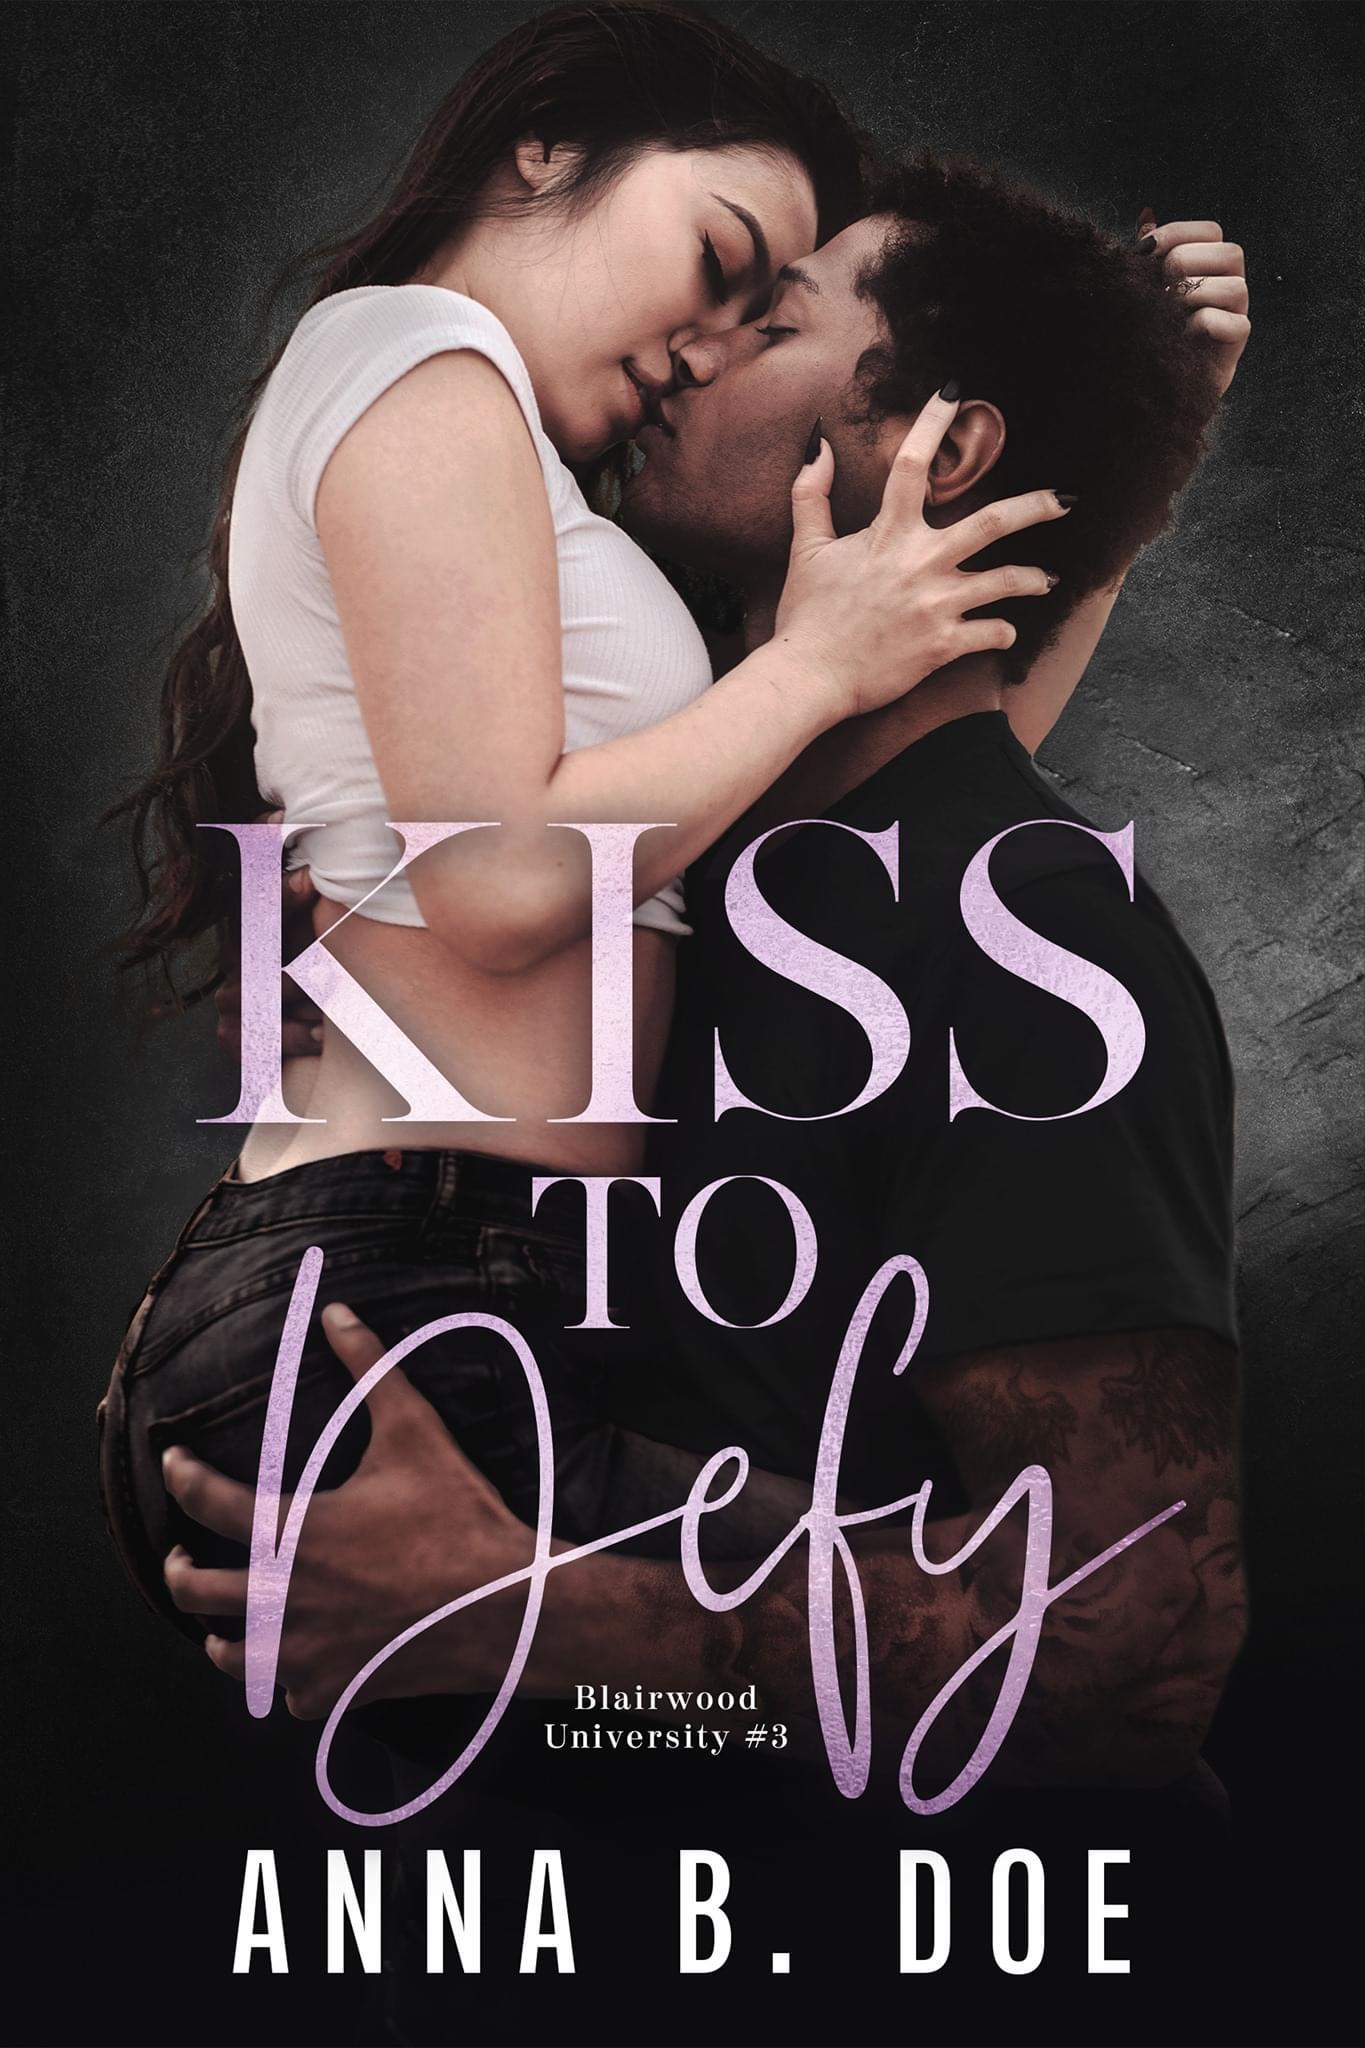 Kiss To Defy